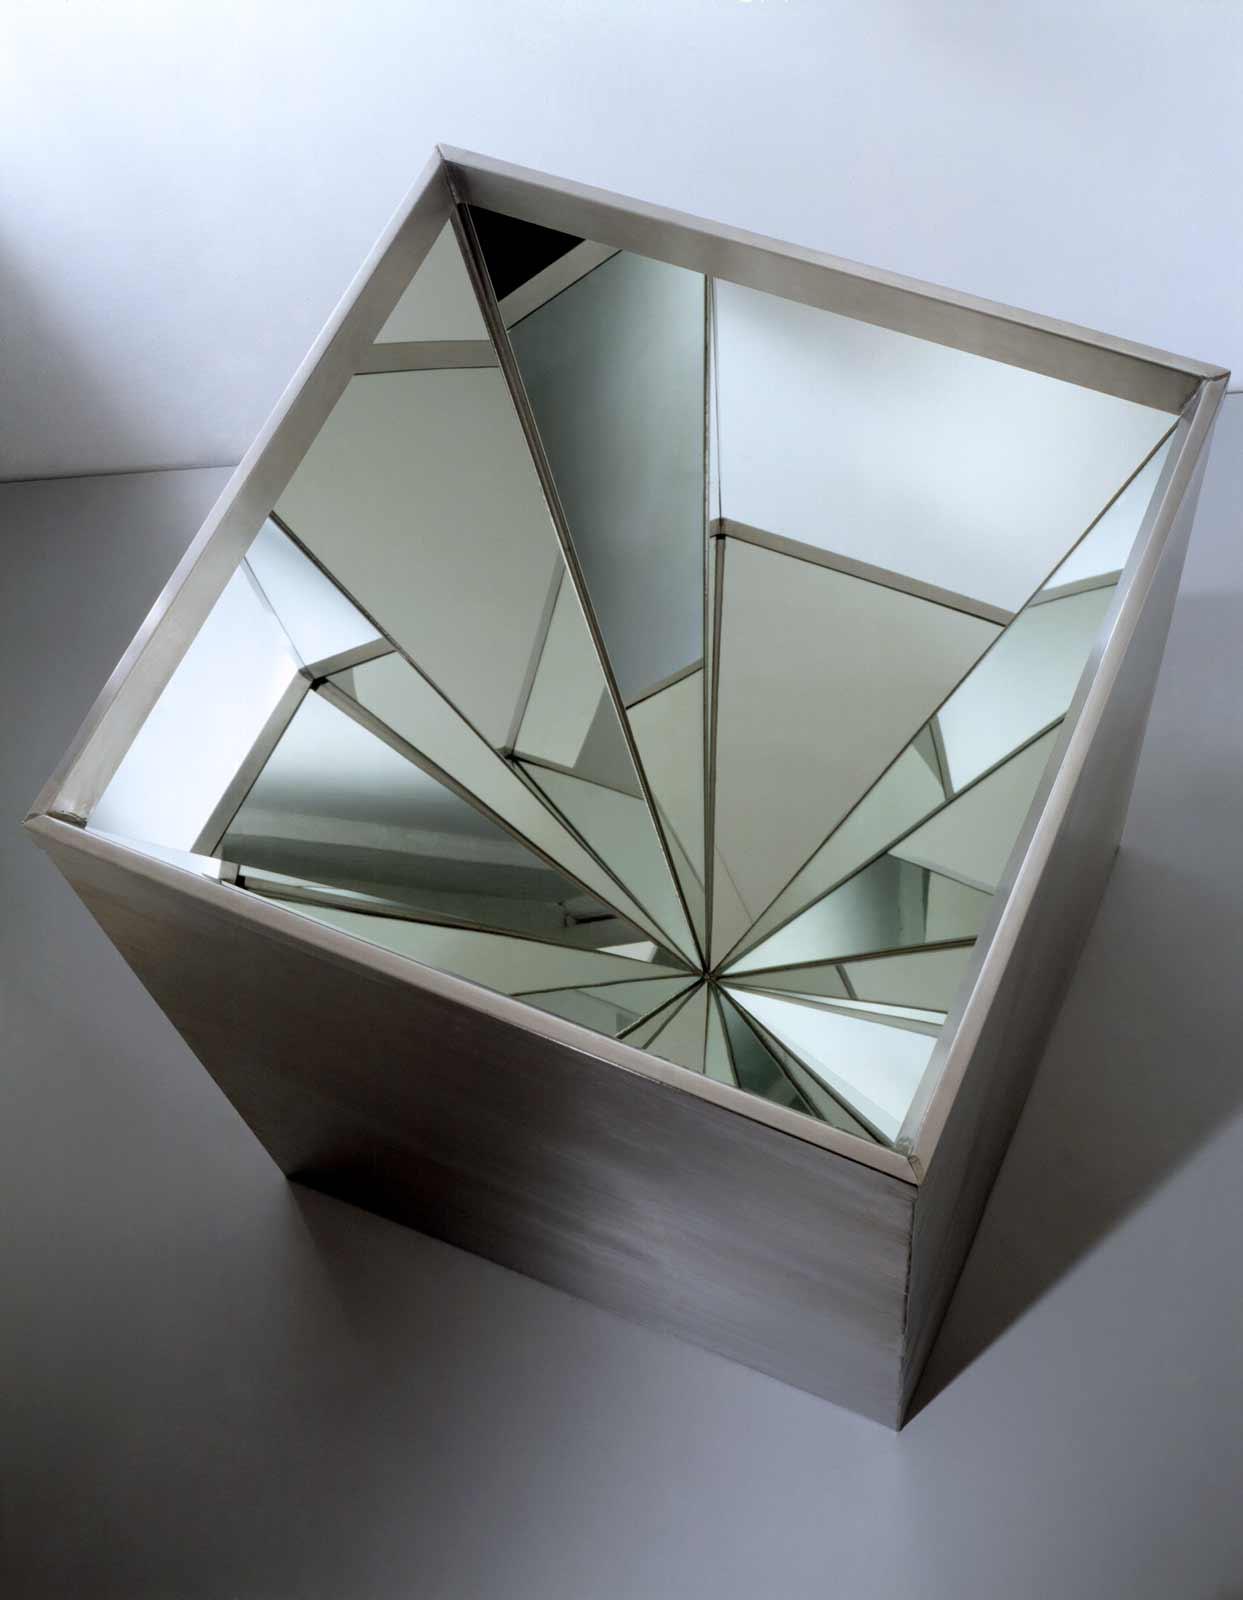 A 28 x 28 inch metal box that is open on the top and lined with four triangular mirrors at meet at their apex.